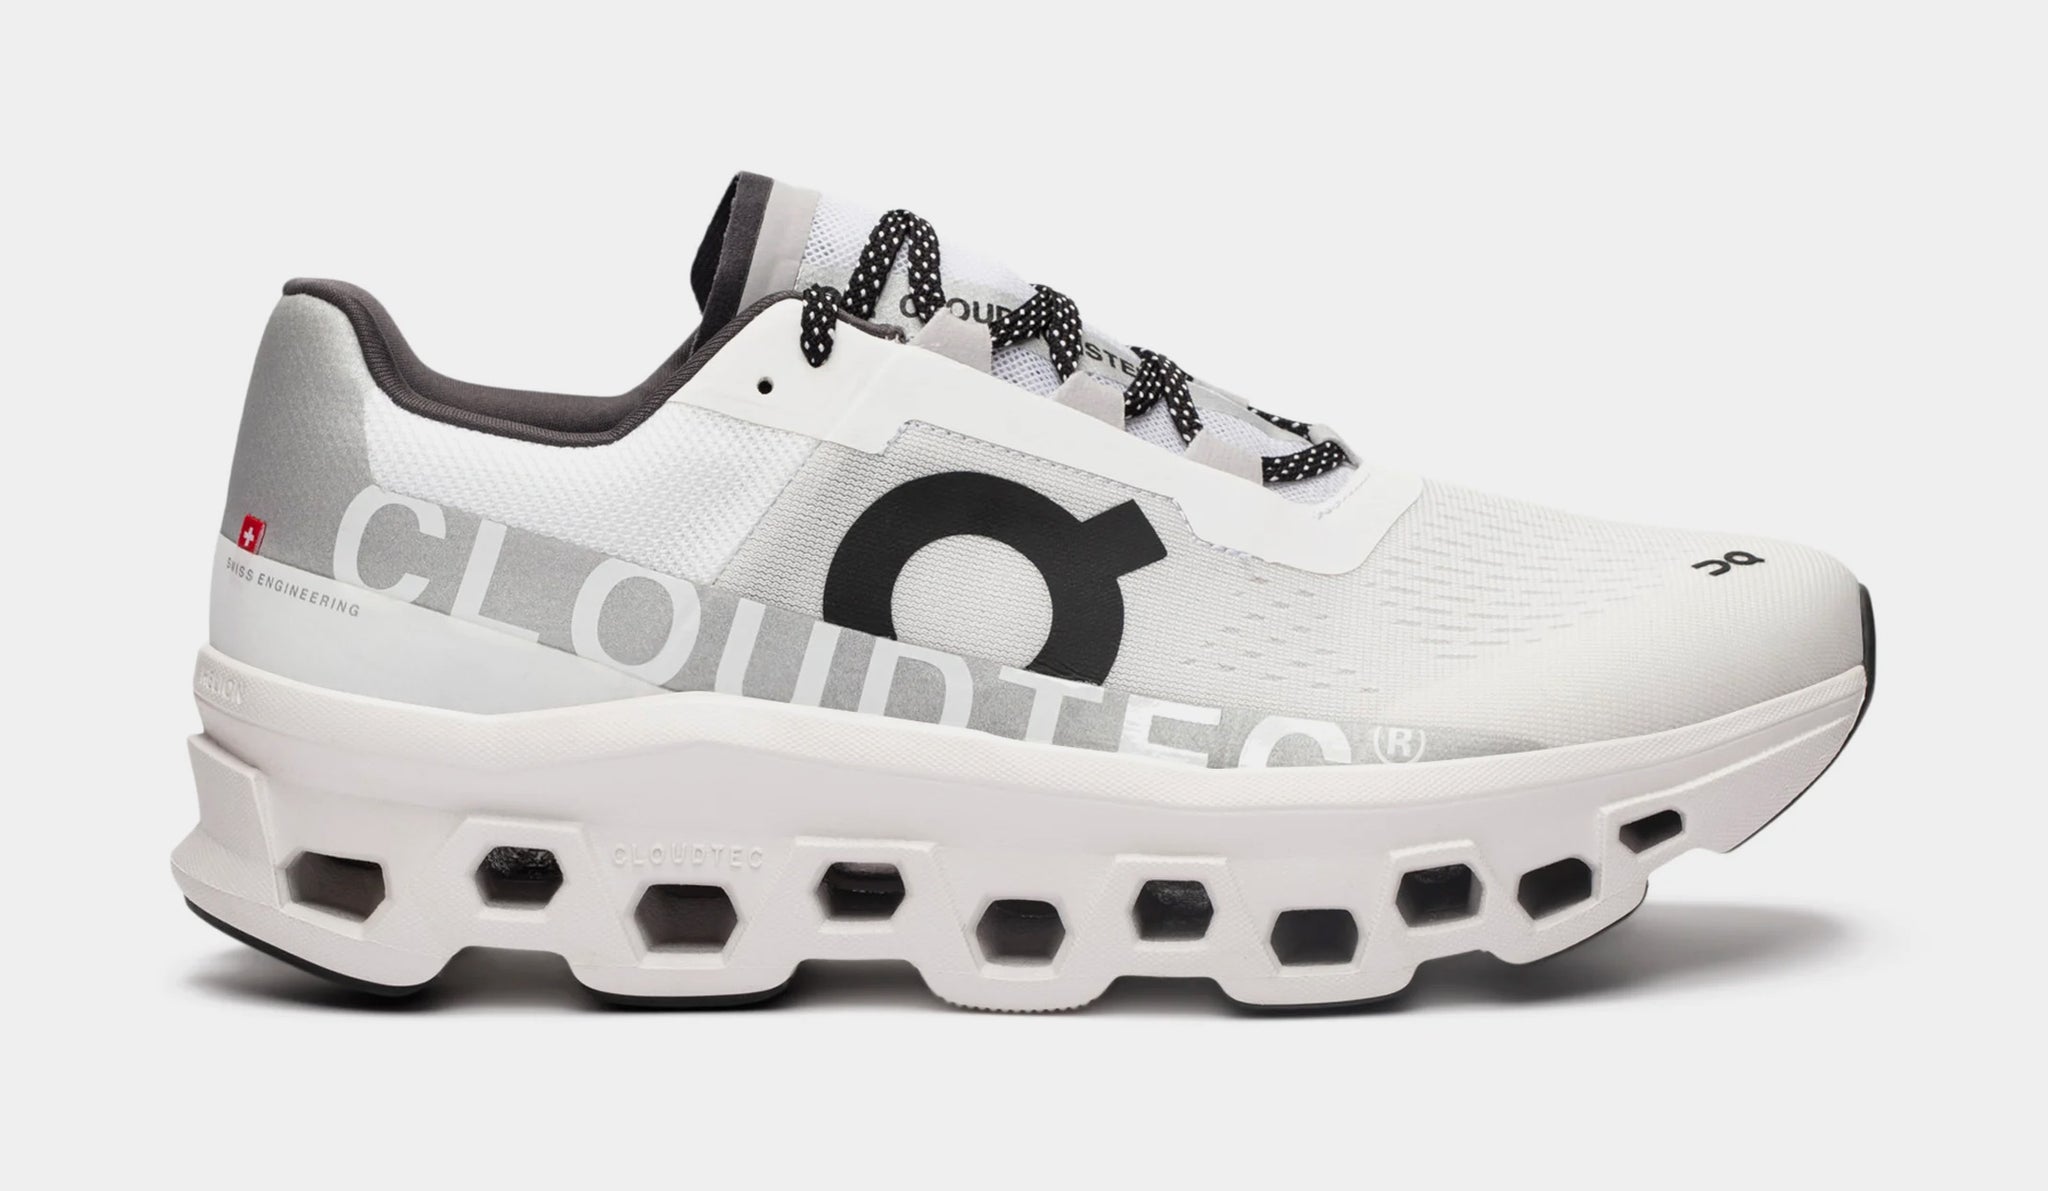 Cloudmonster Mens Running Shoes (All White)